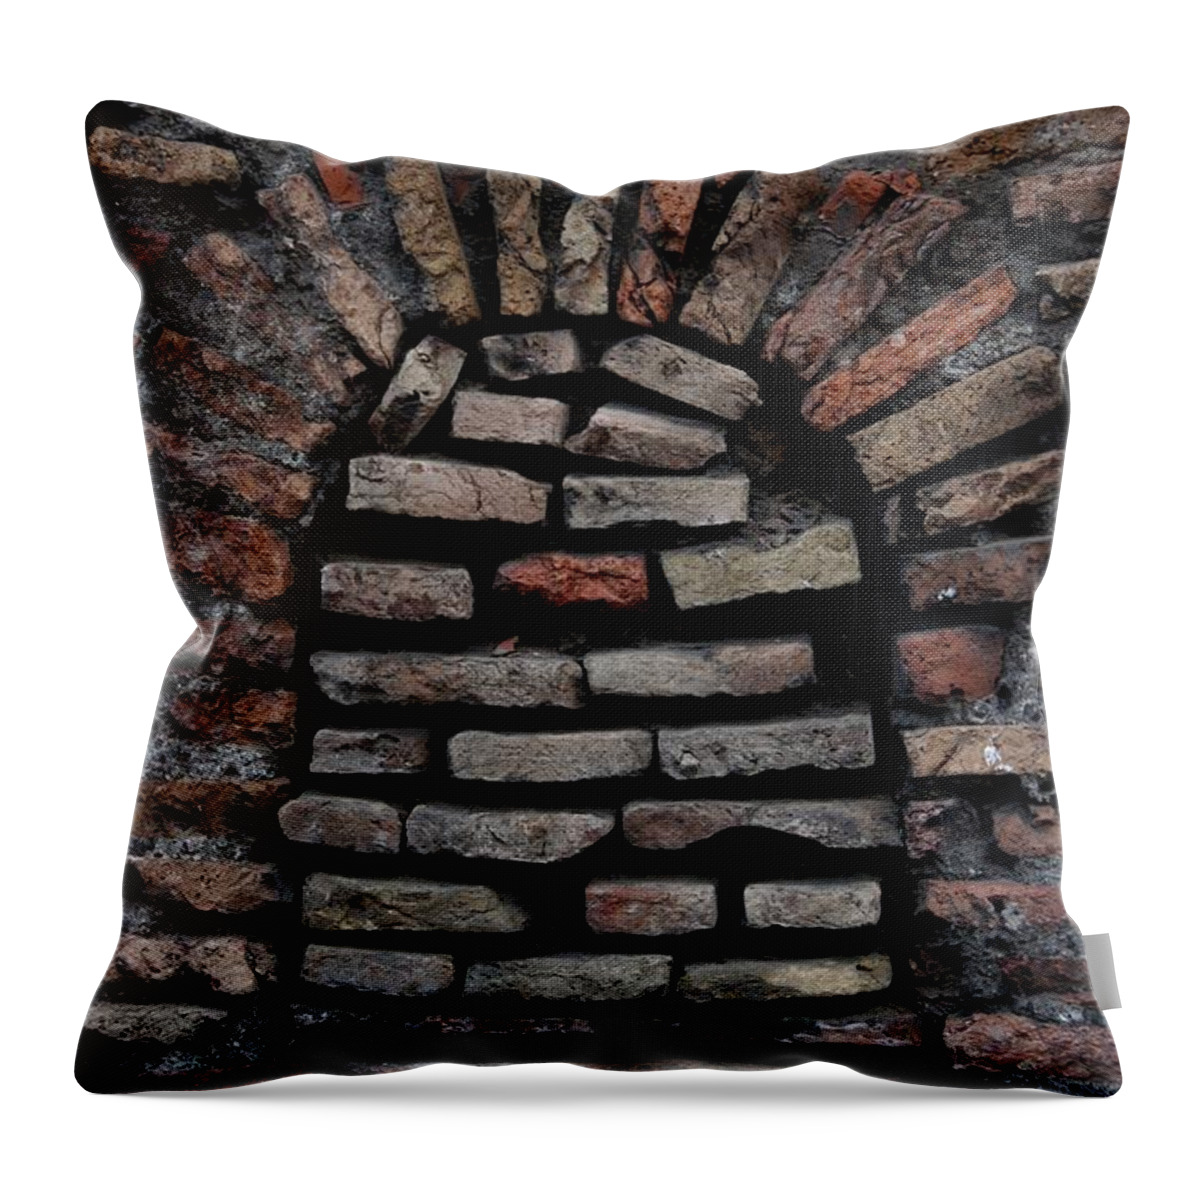 Bricks Throw Pillow featuring the photograph Along the Way by Joseph Yarbrough